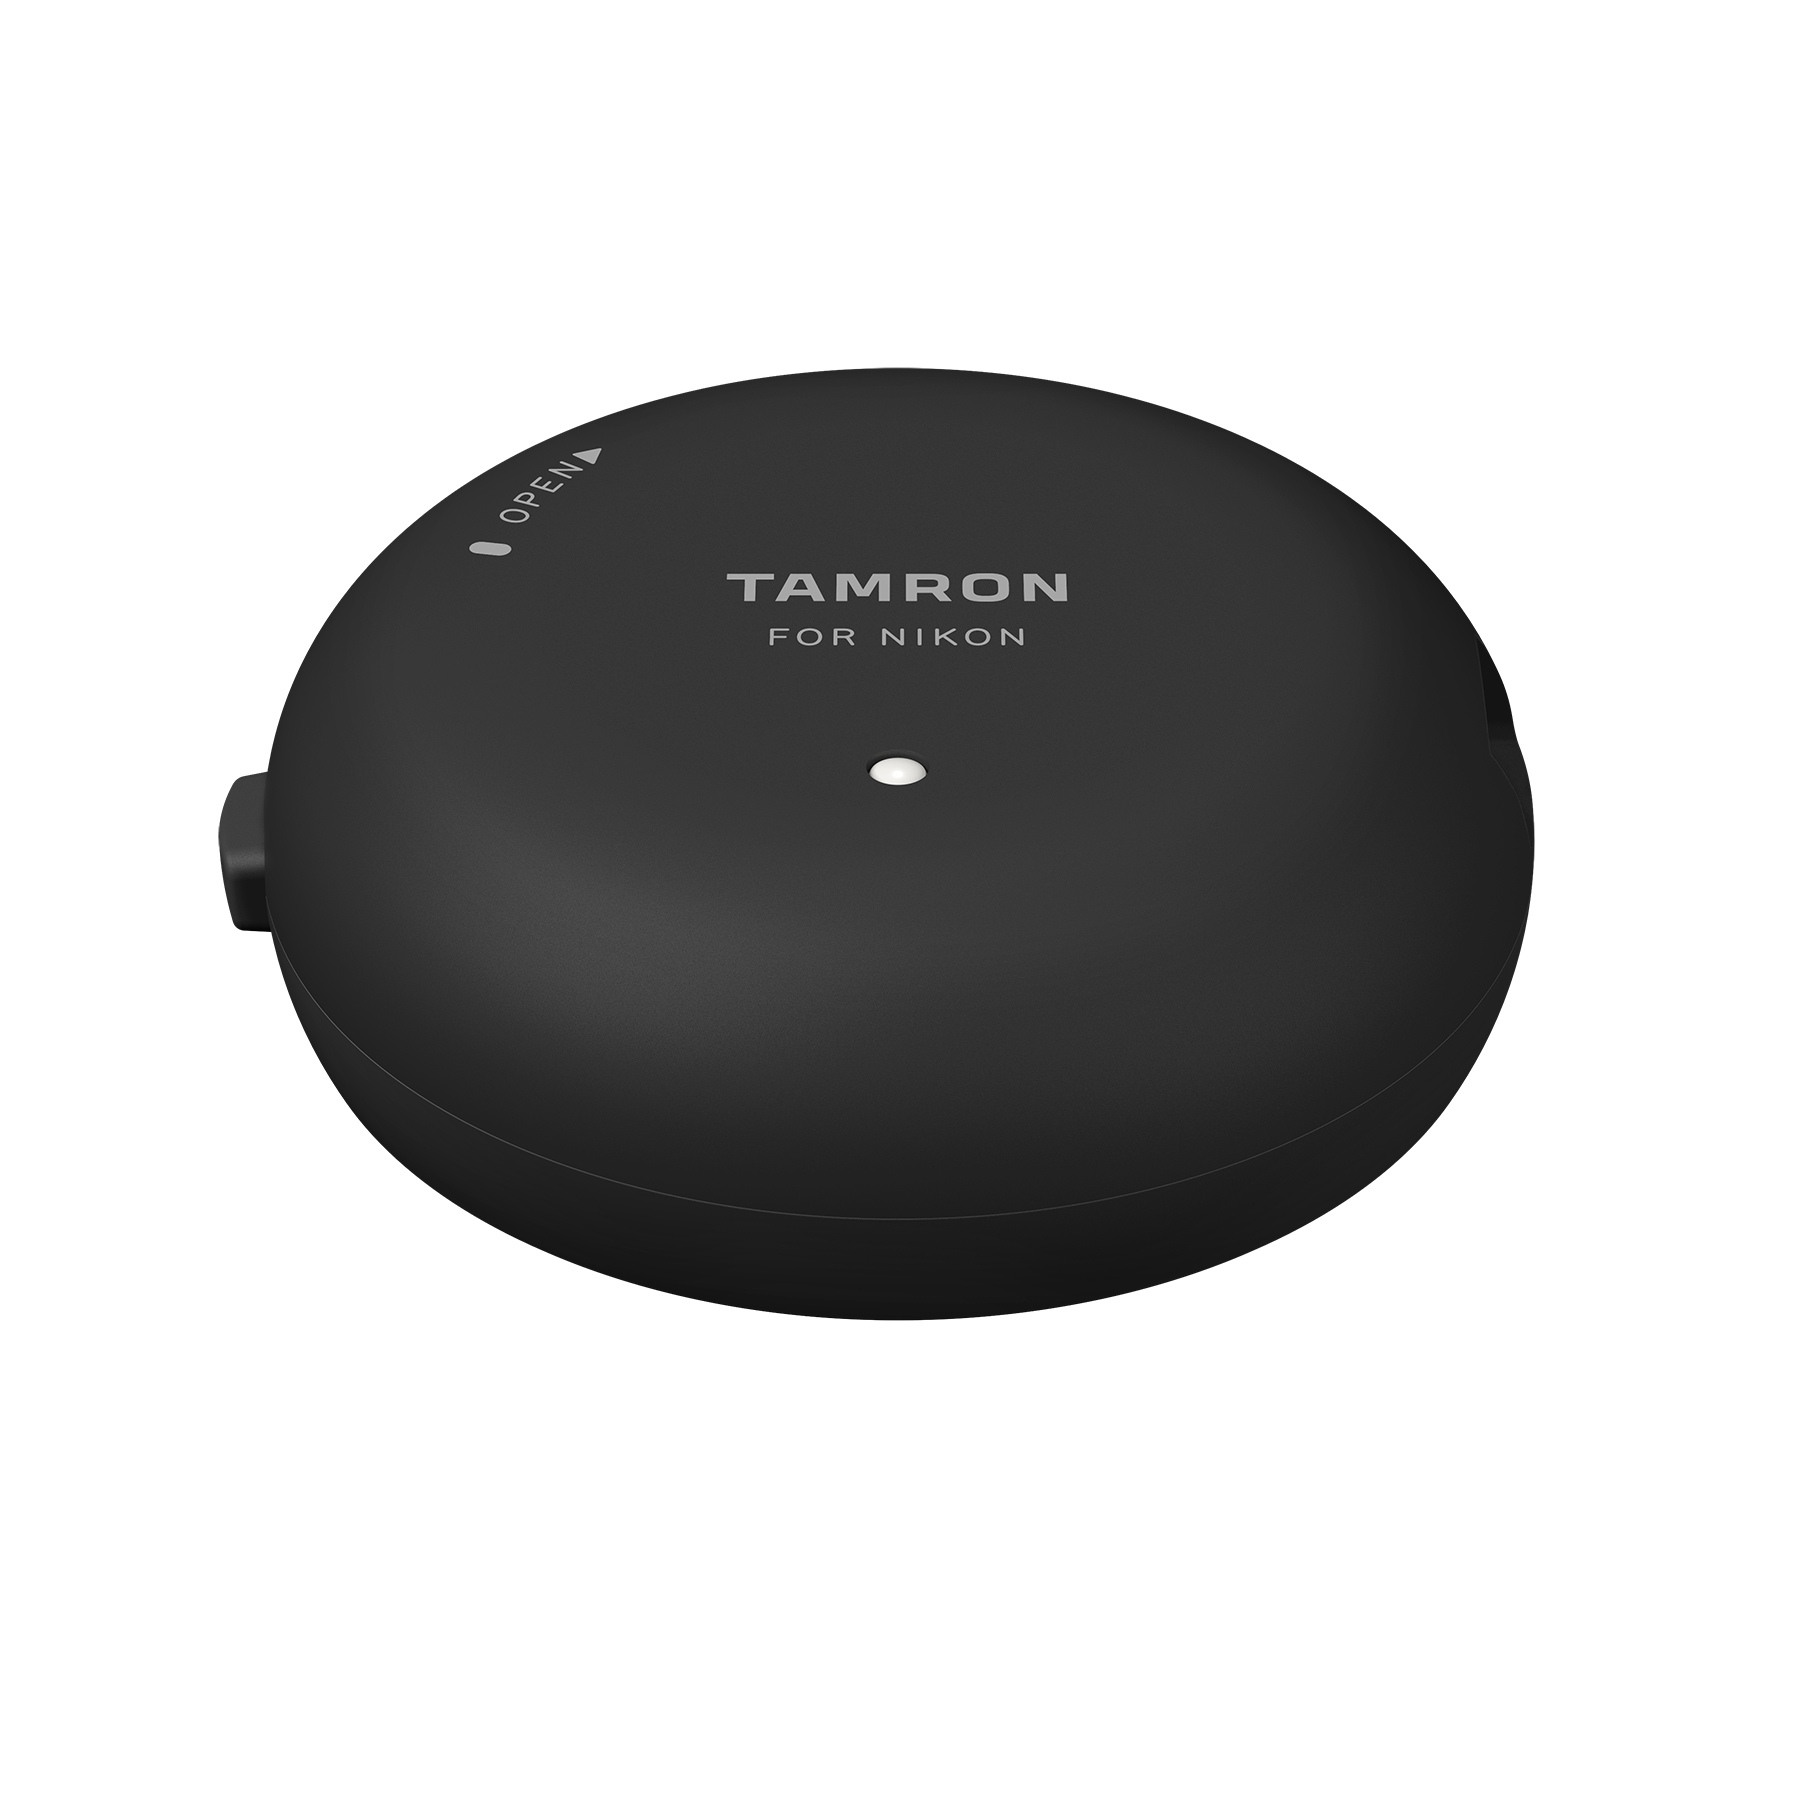 Tamron TAP-in Console (Model TAP-01)